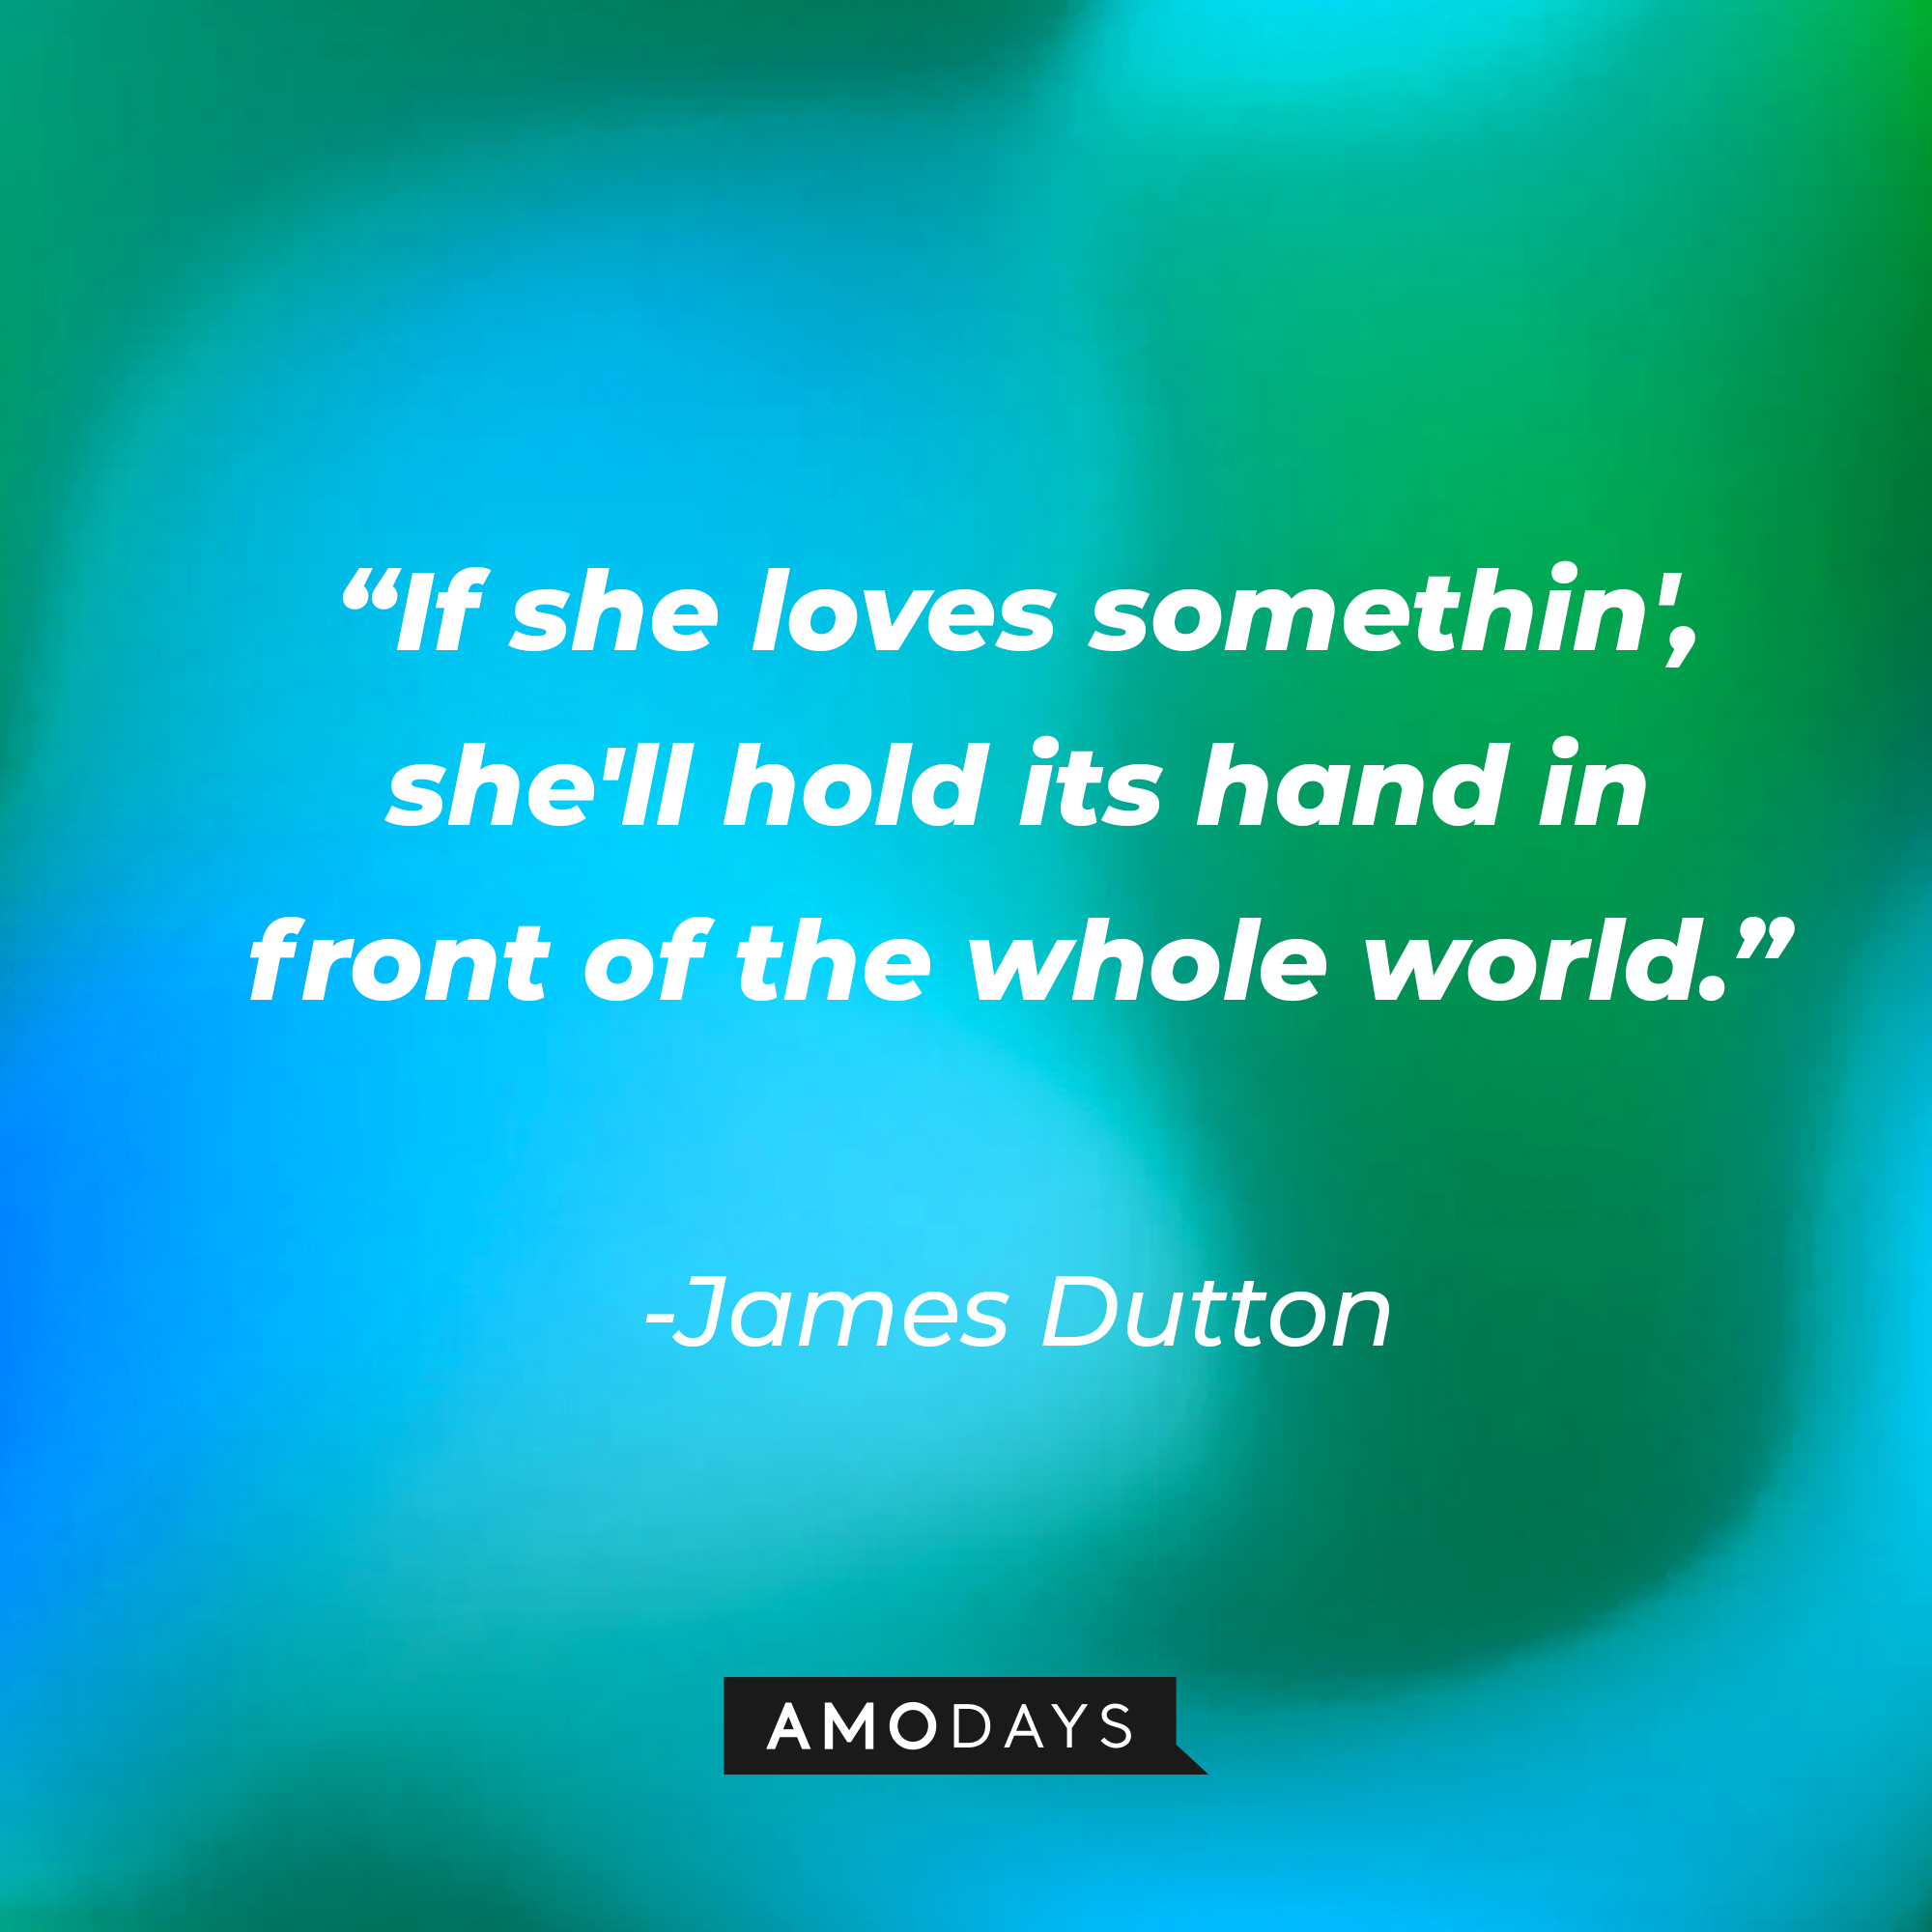 James Dutton’s quote:  “If she loves somethin', she'll hold its hand in front of the whole world.” | Source: AmoDays